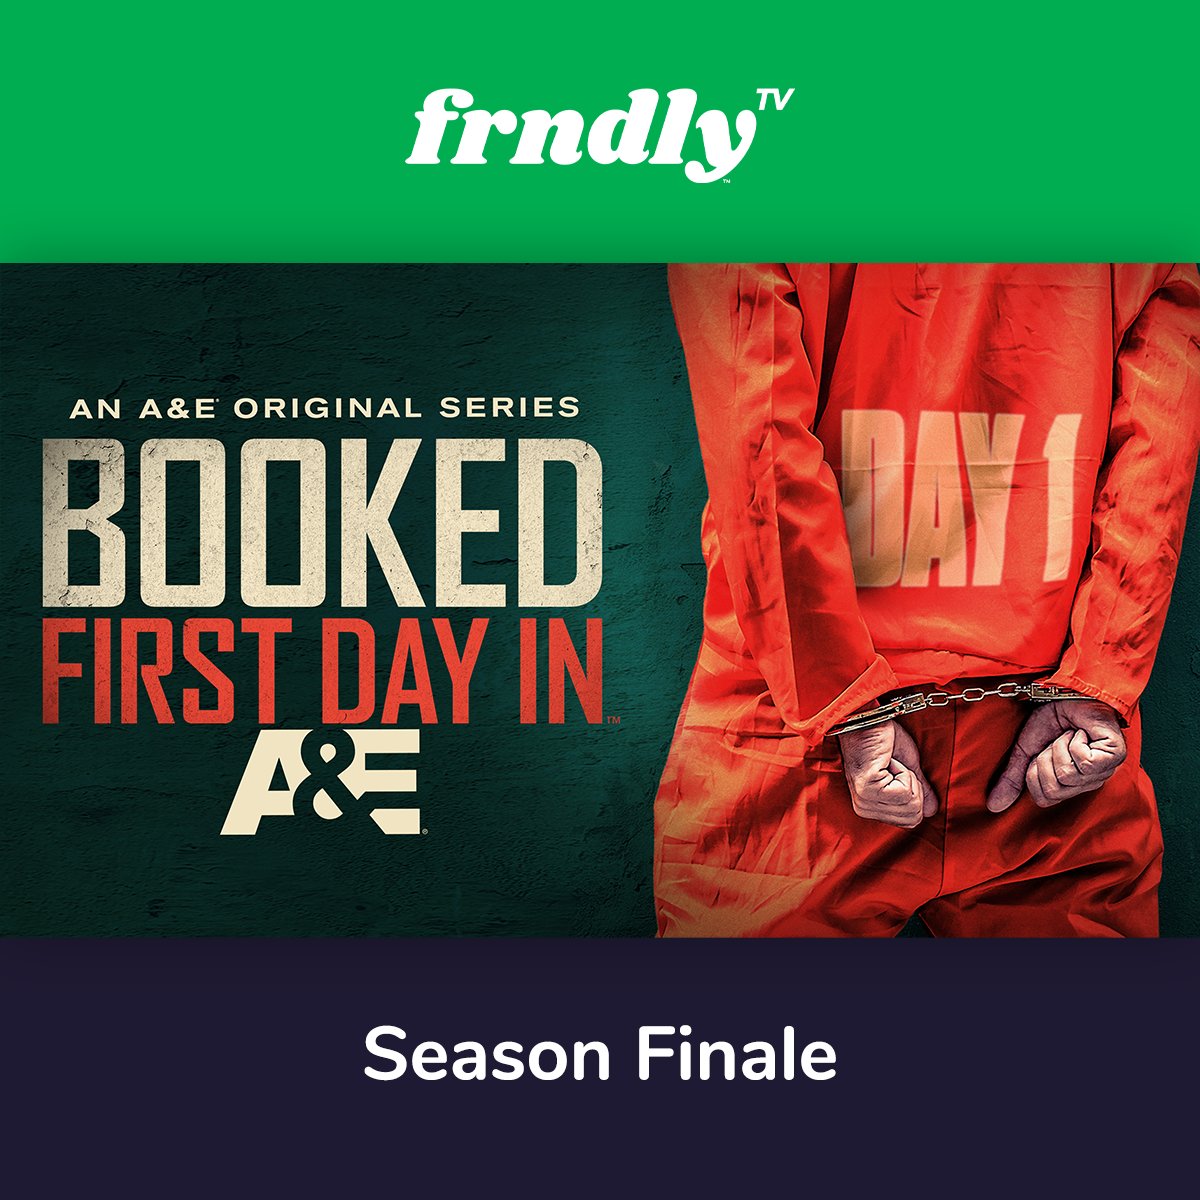 Don't miss the season finale of Booked: First Day In, airing Wednesday, Mar. 27th at 10/9c on @AETV.